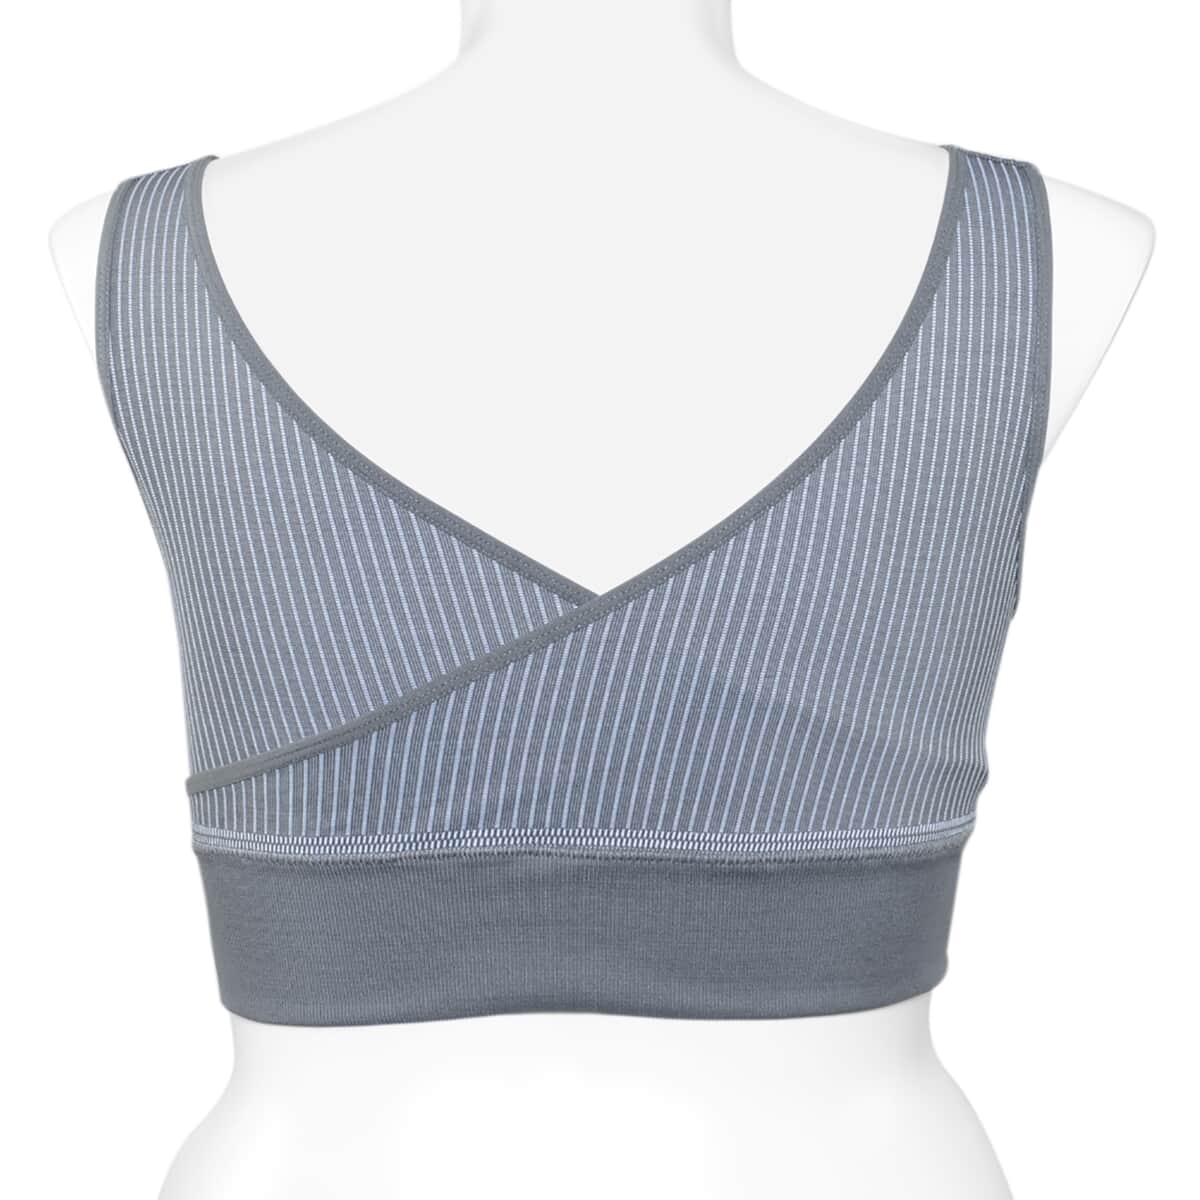 SANKOM-Gray Support & Posture Bra with Bamboo Fibers (M/L) image number 3